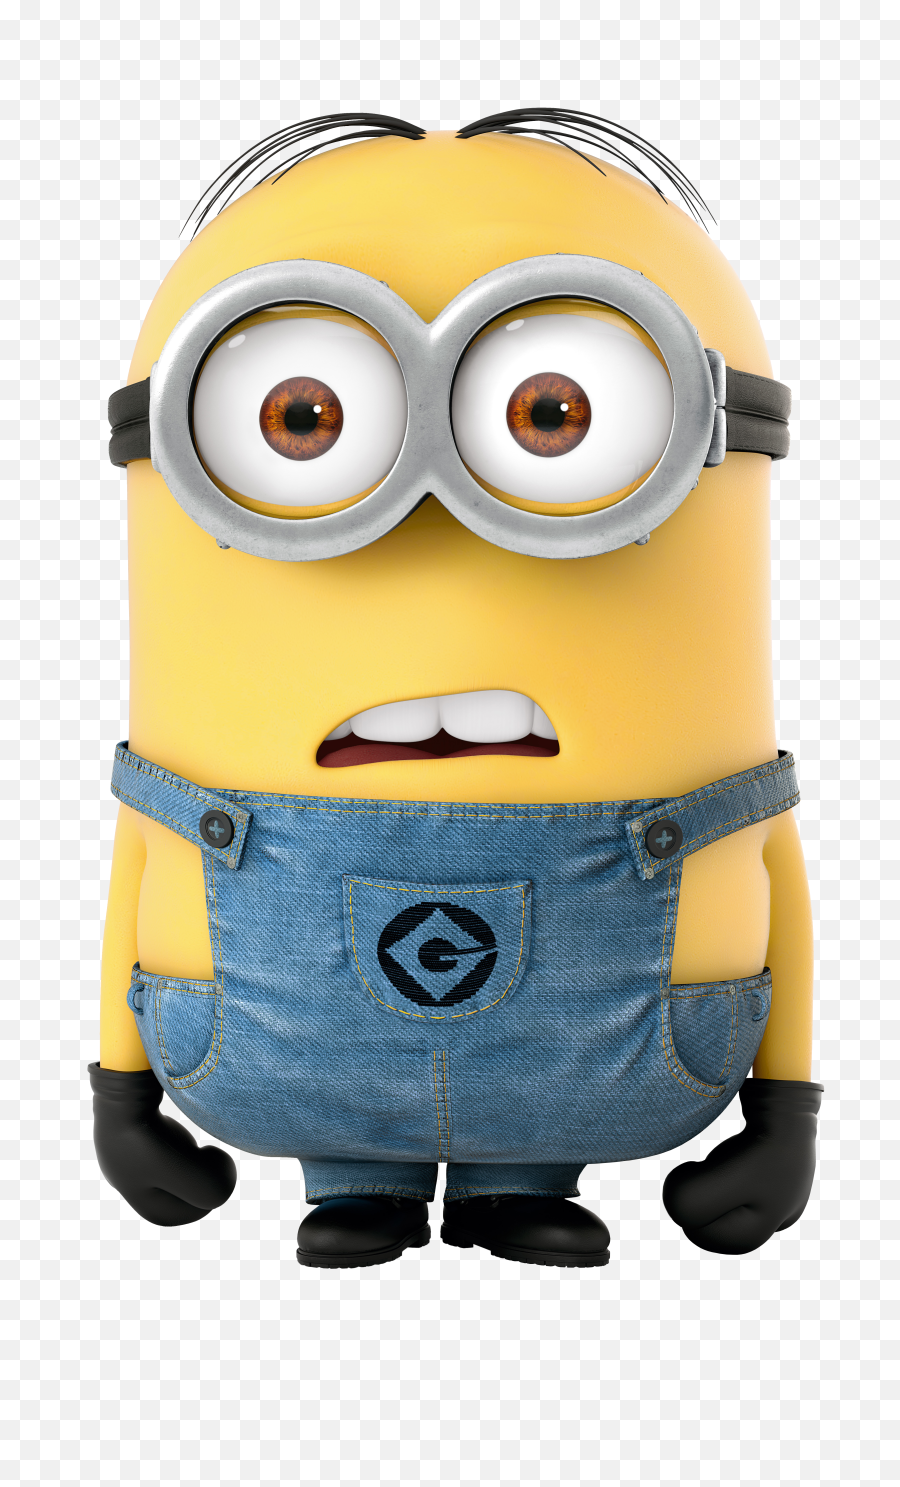 Image Minion Png 42179 - Free Icons And Png Backgrounds Minion Despicable Me Characters,Overalls Png